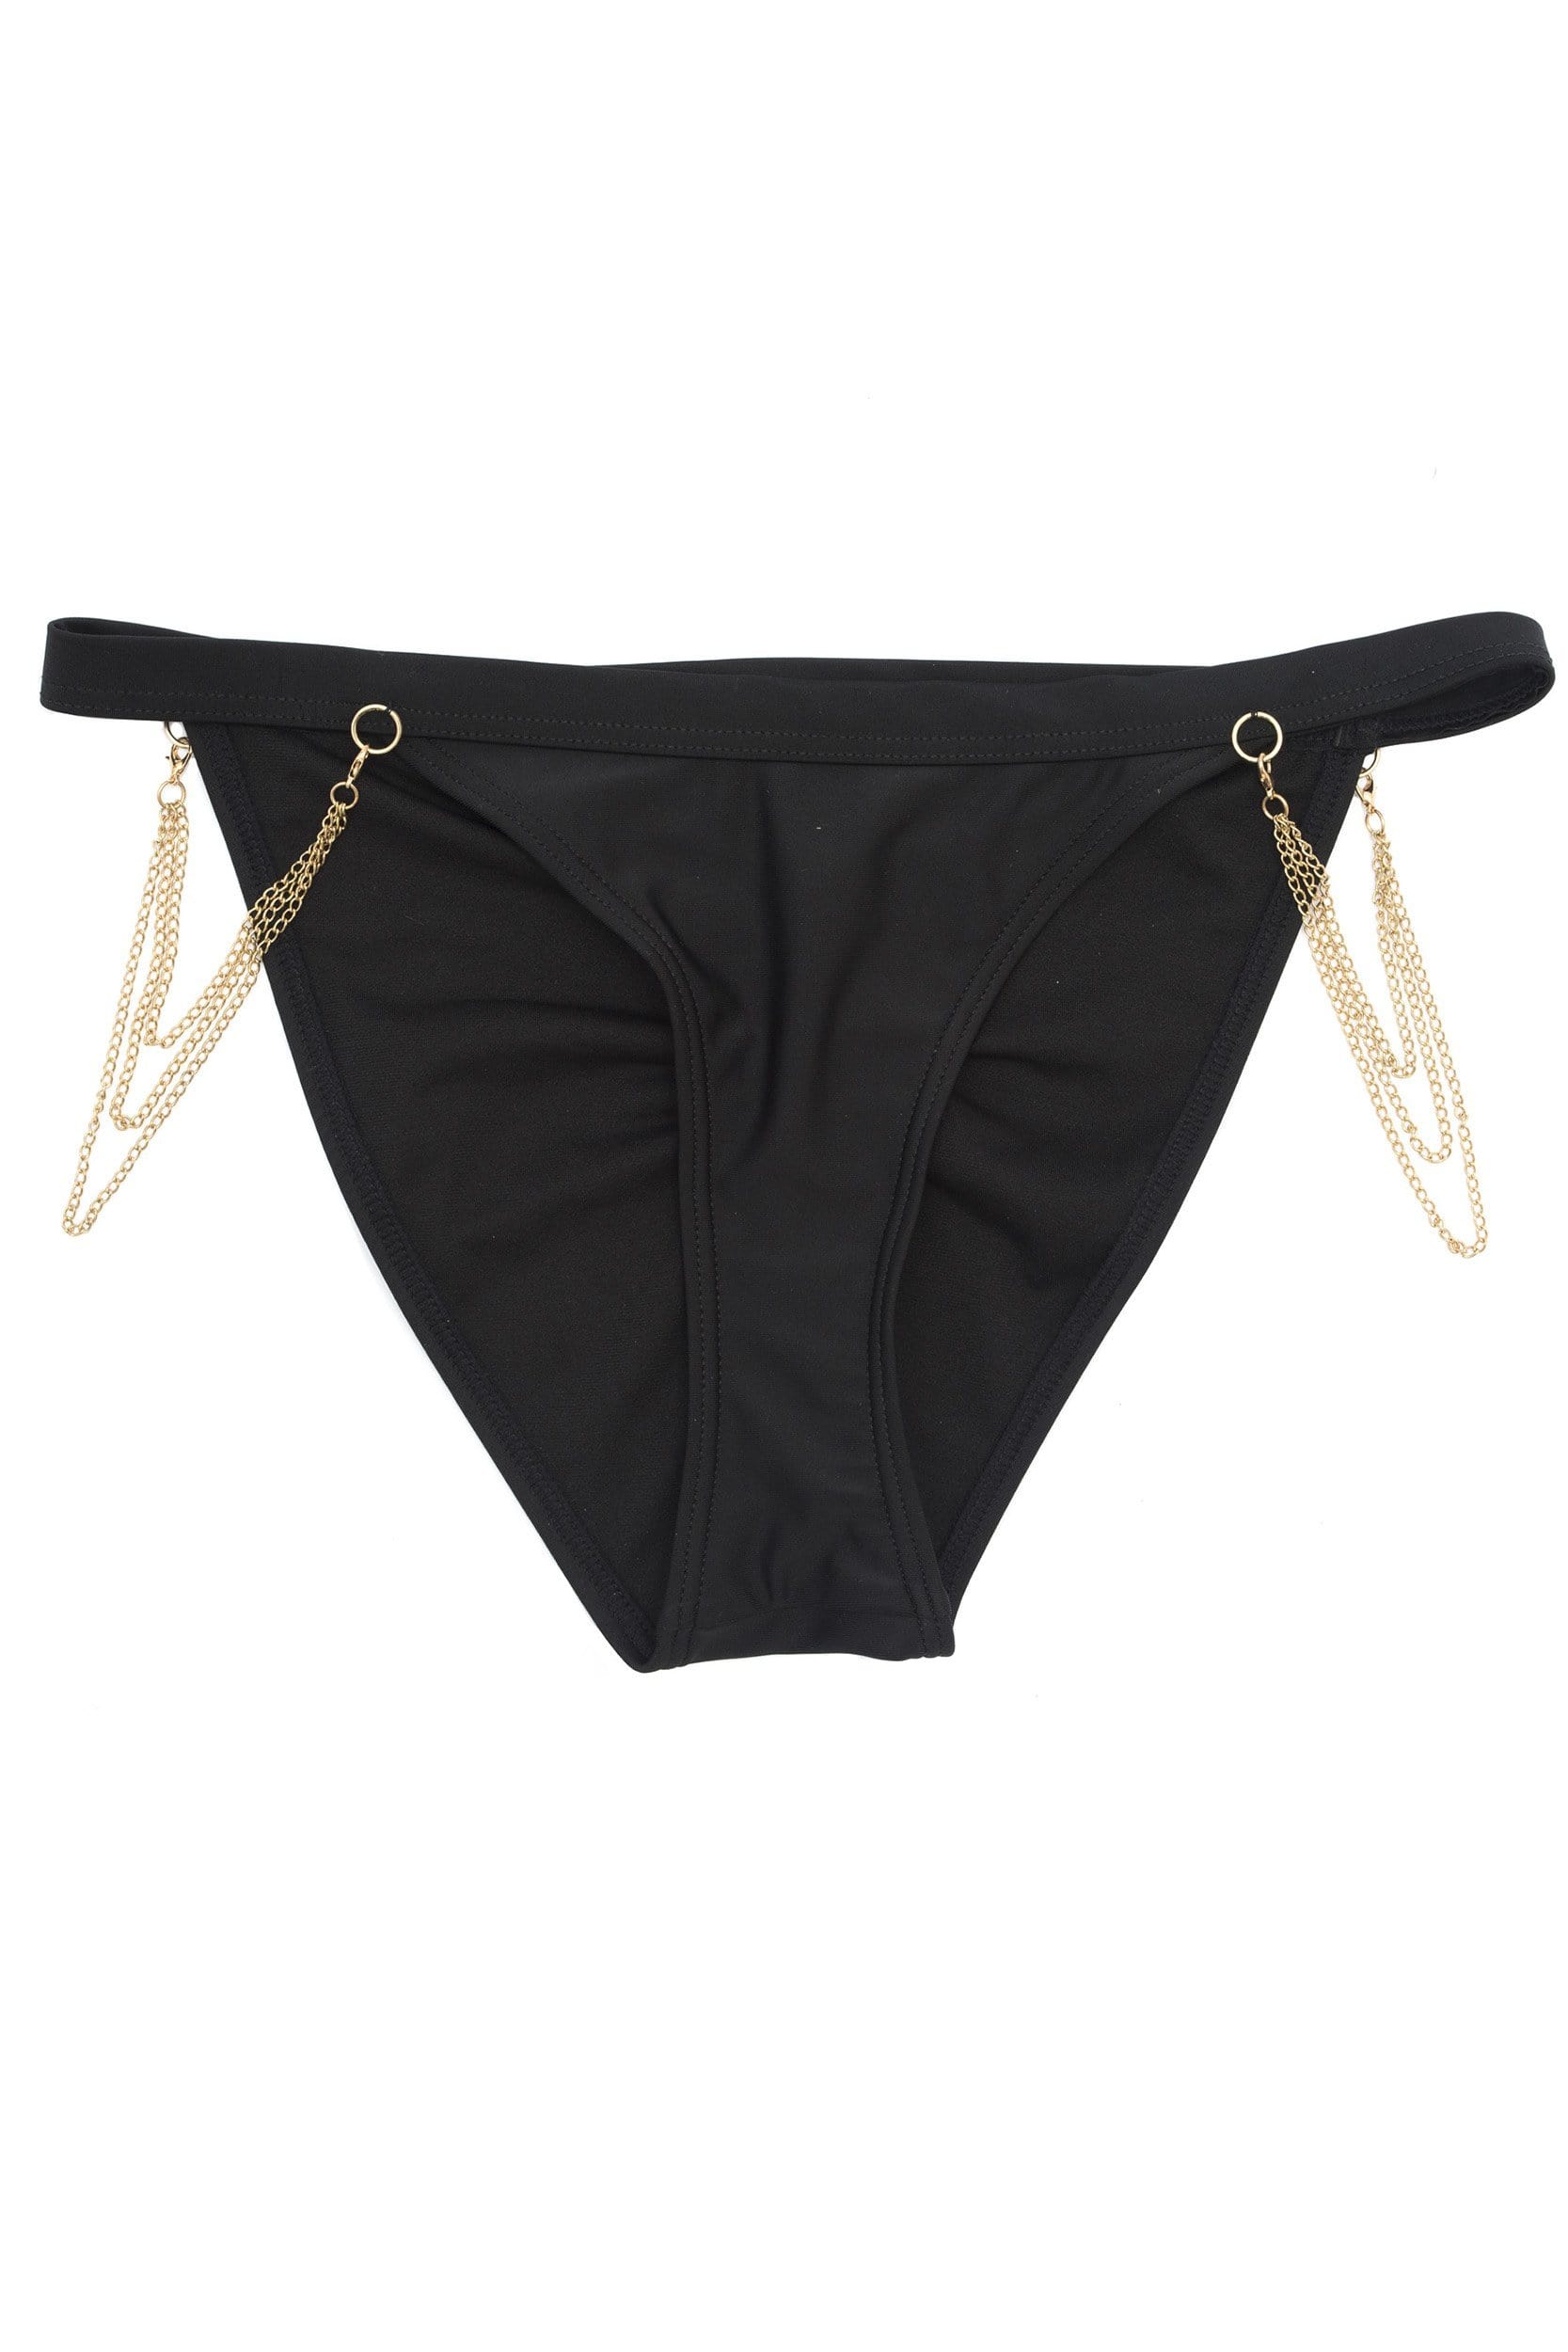 Wolf & Whistle Goldie black hipster brief with removable chain